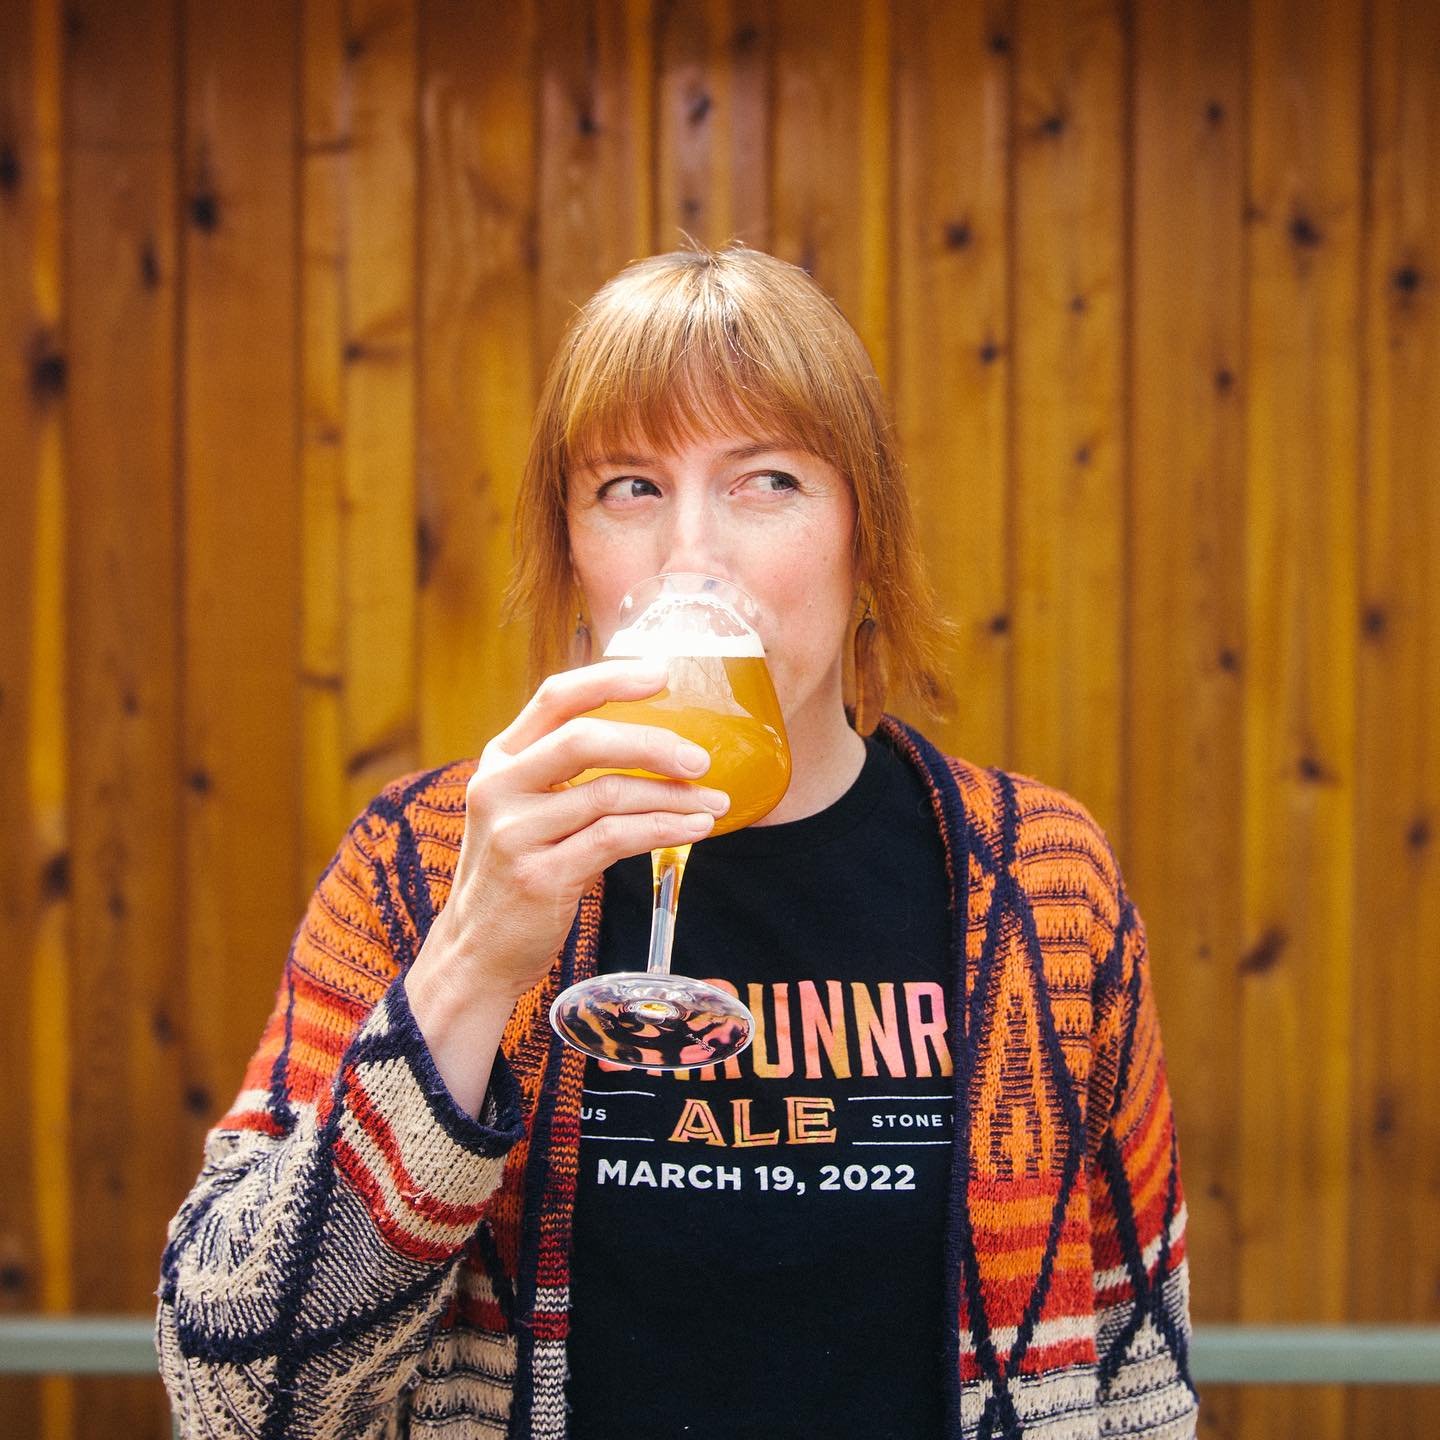 Meet Jen!

Jen is the manager of our Downtown Pub &amp; People Operations! If you&rsquo;ve ever reached out to &lsquo;Stormcloud&rsquo; for any reason, you&rsquo;ve probably had a chat with her (whether you know it or not.) Anytime Jen&rsquo;s on the